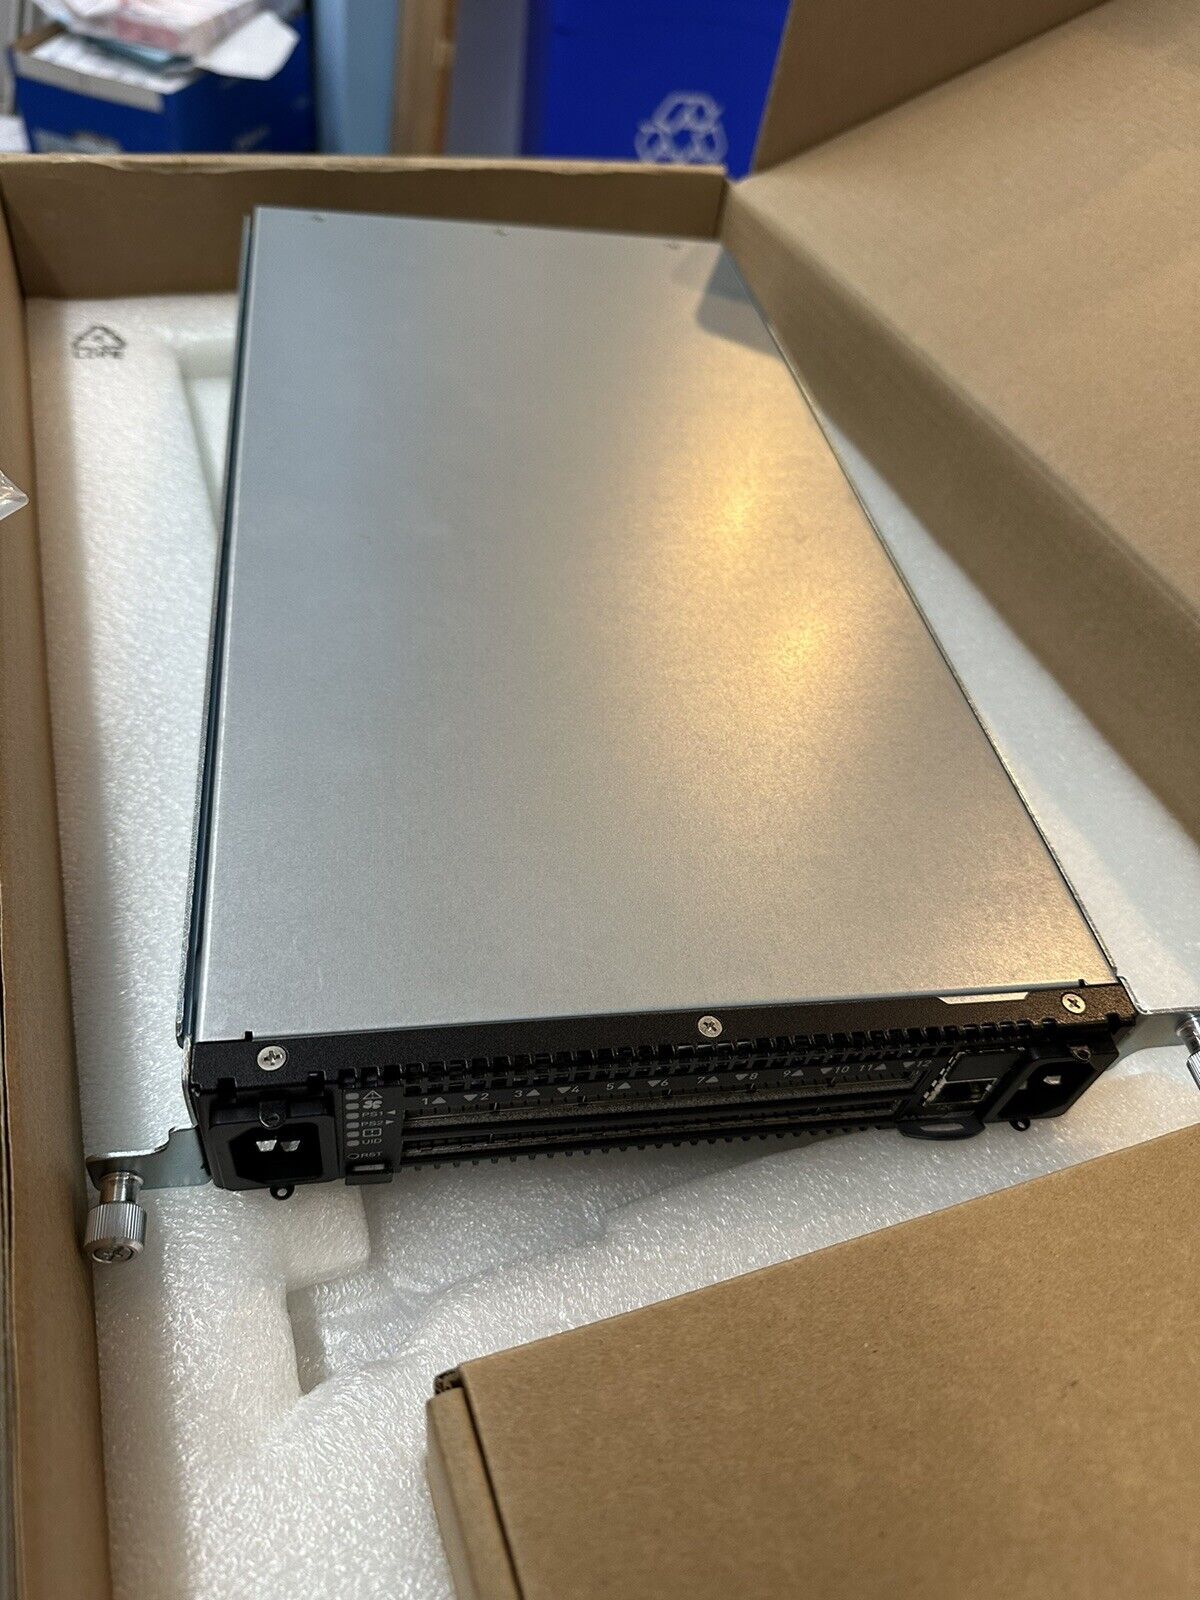 *Open Box* MELLANOX SX6005 12-PORT INFINIBAND Switch, INCLUDES 10xQSFP 1m Cables